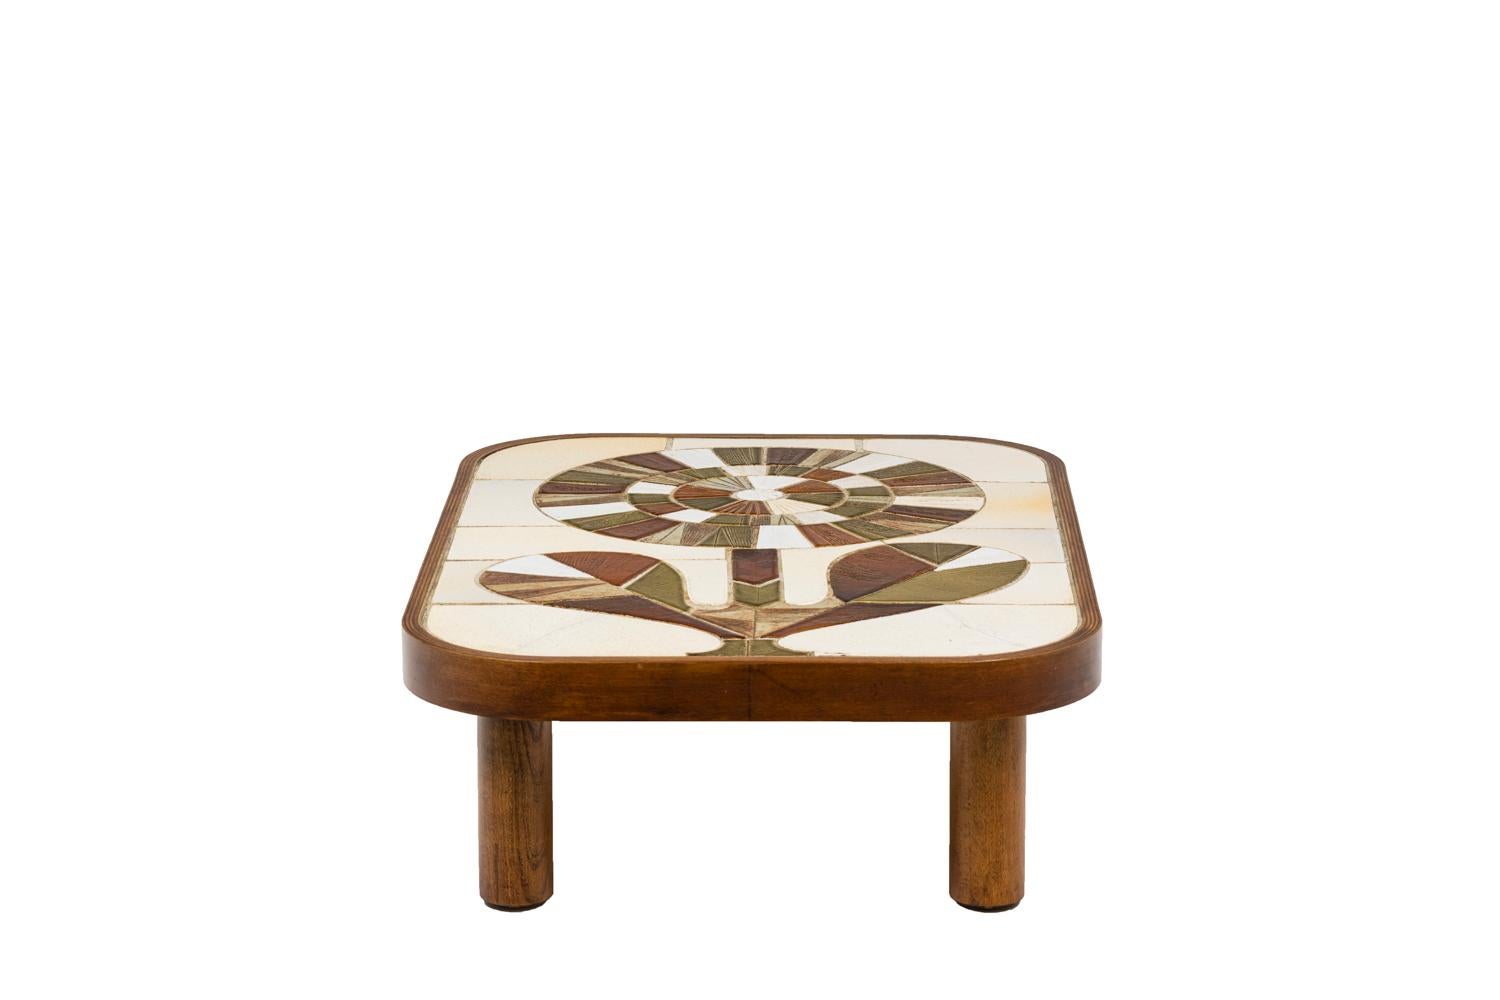 European Roger Capron, Coffee Table in Wood and Ceramics, 1960’s